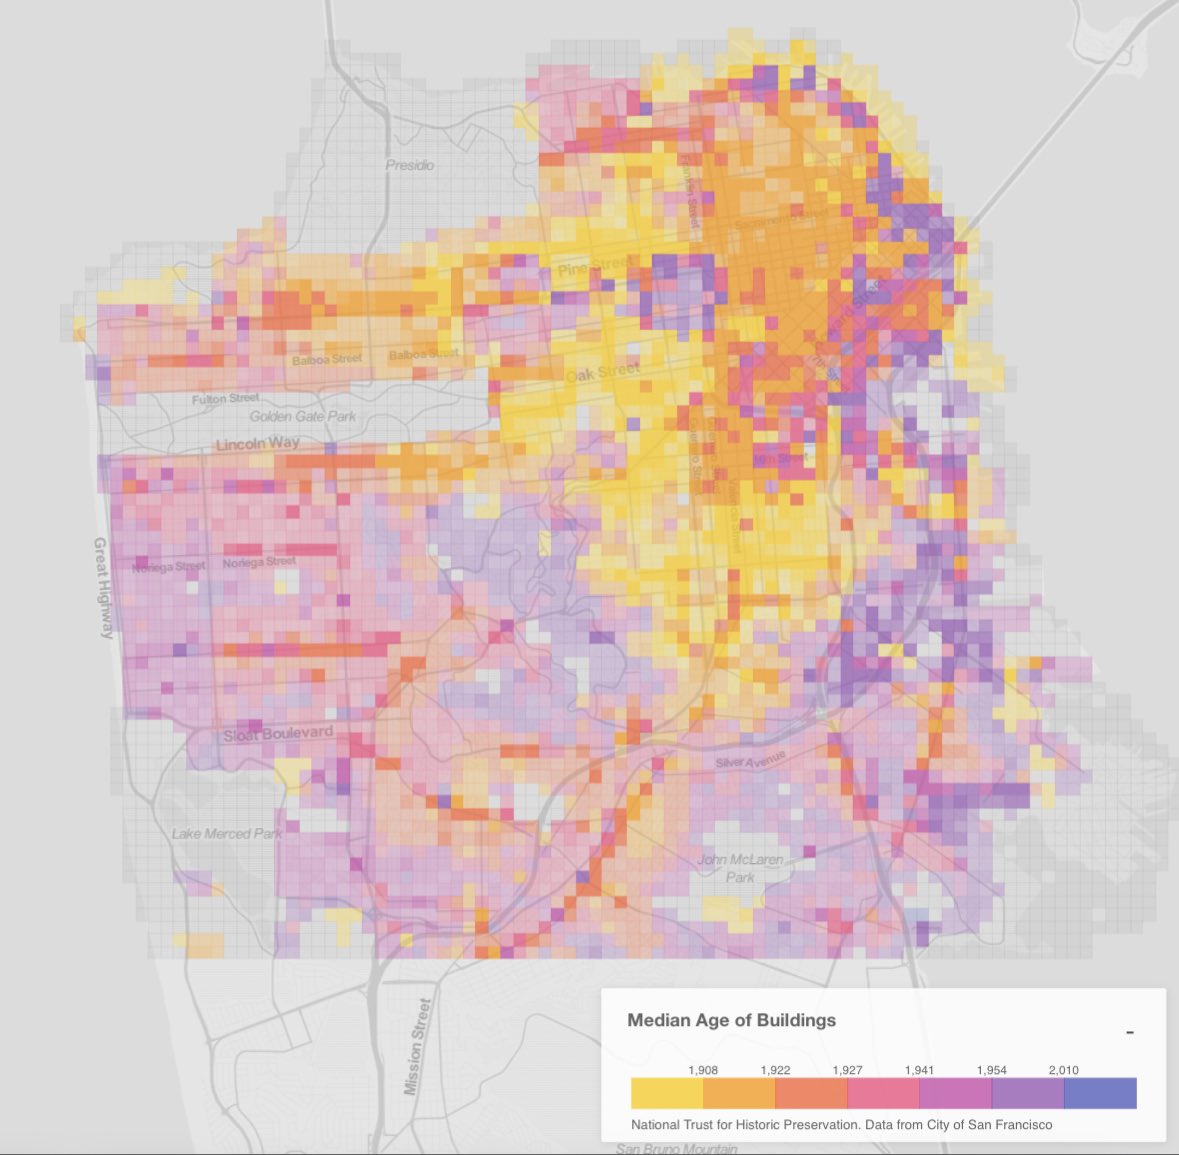 Requiring a conditional use permit to demolish any housing built before 1923, even if it has not been designated historic, will make it *much* harder to build housing in the neighborhoods shown in yellow and light orange on this map, notably including the Castro and North Beach.